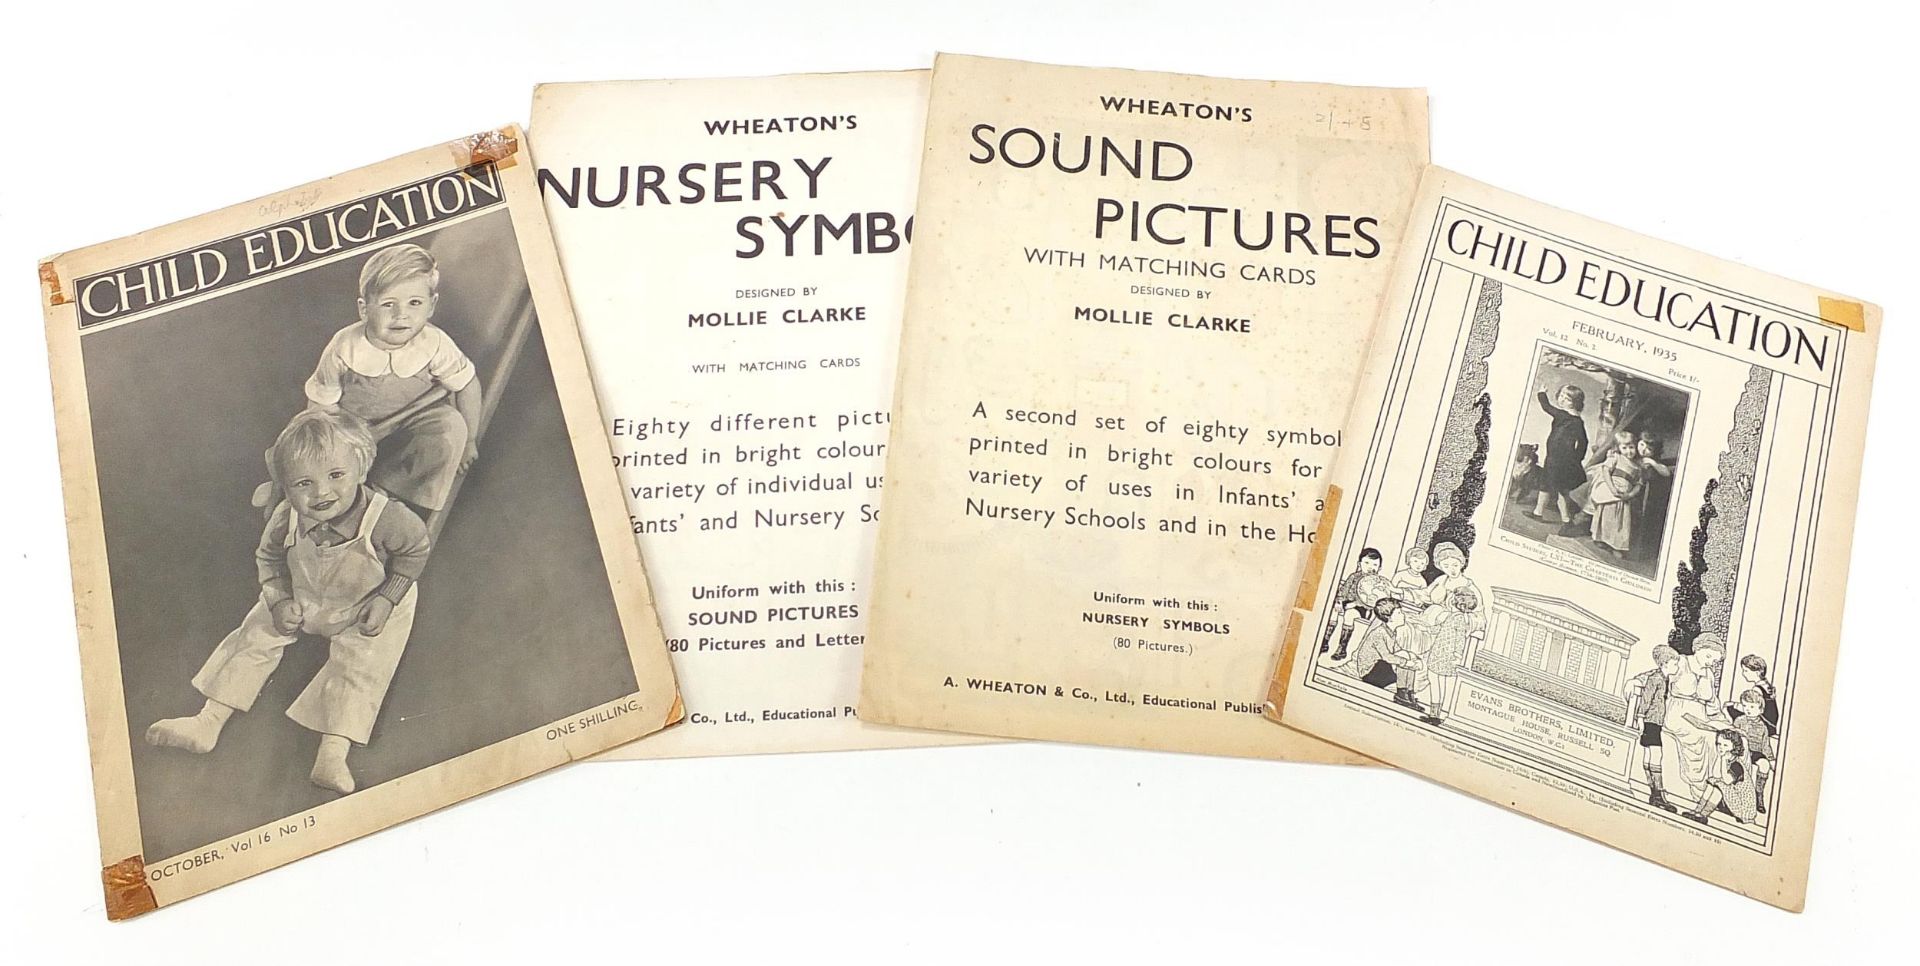 Vintage child's educational posters including Wheaton's Nursery Symbols designed by Mollie Clarke